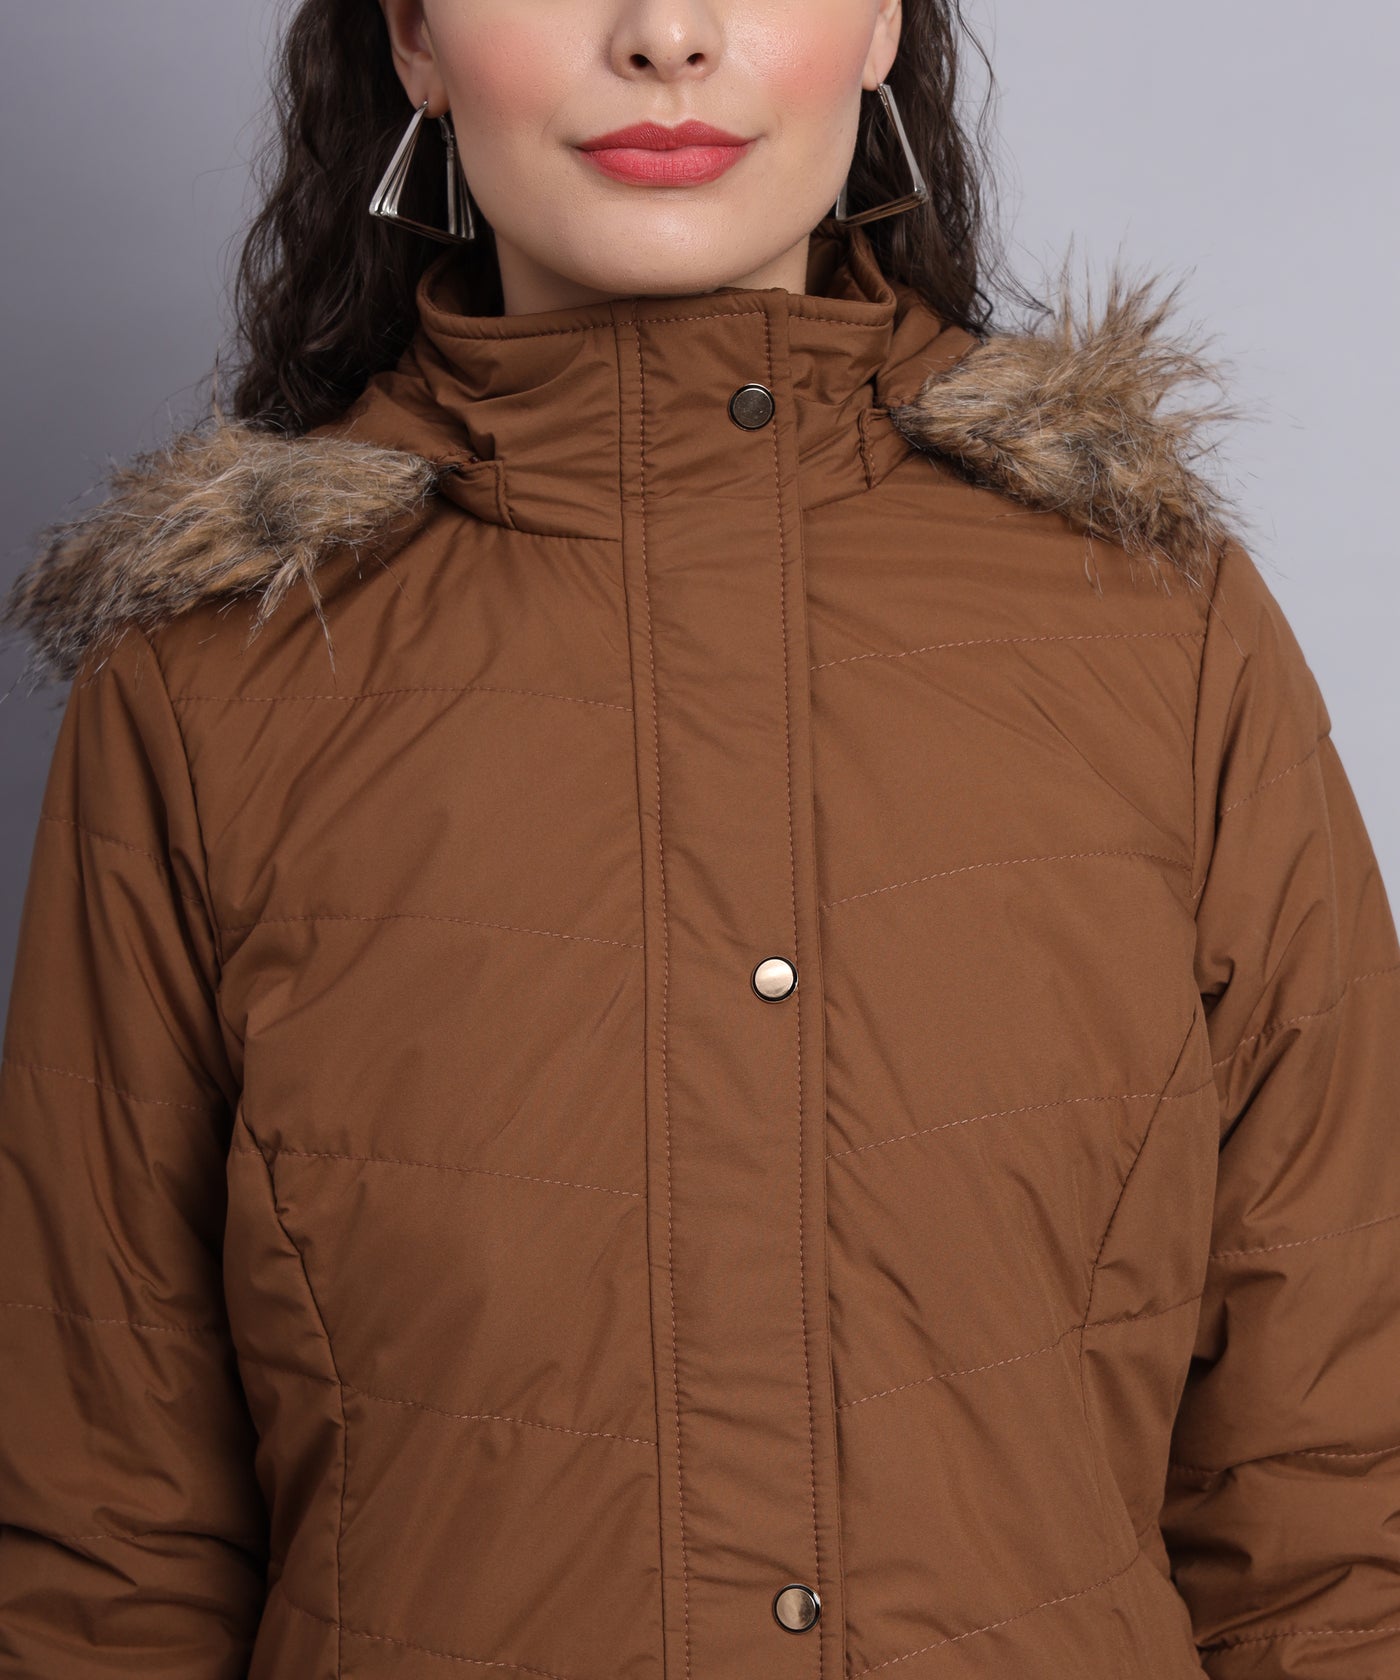 Tan Shell quilted water proof jacket-AW6175